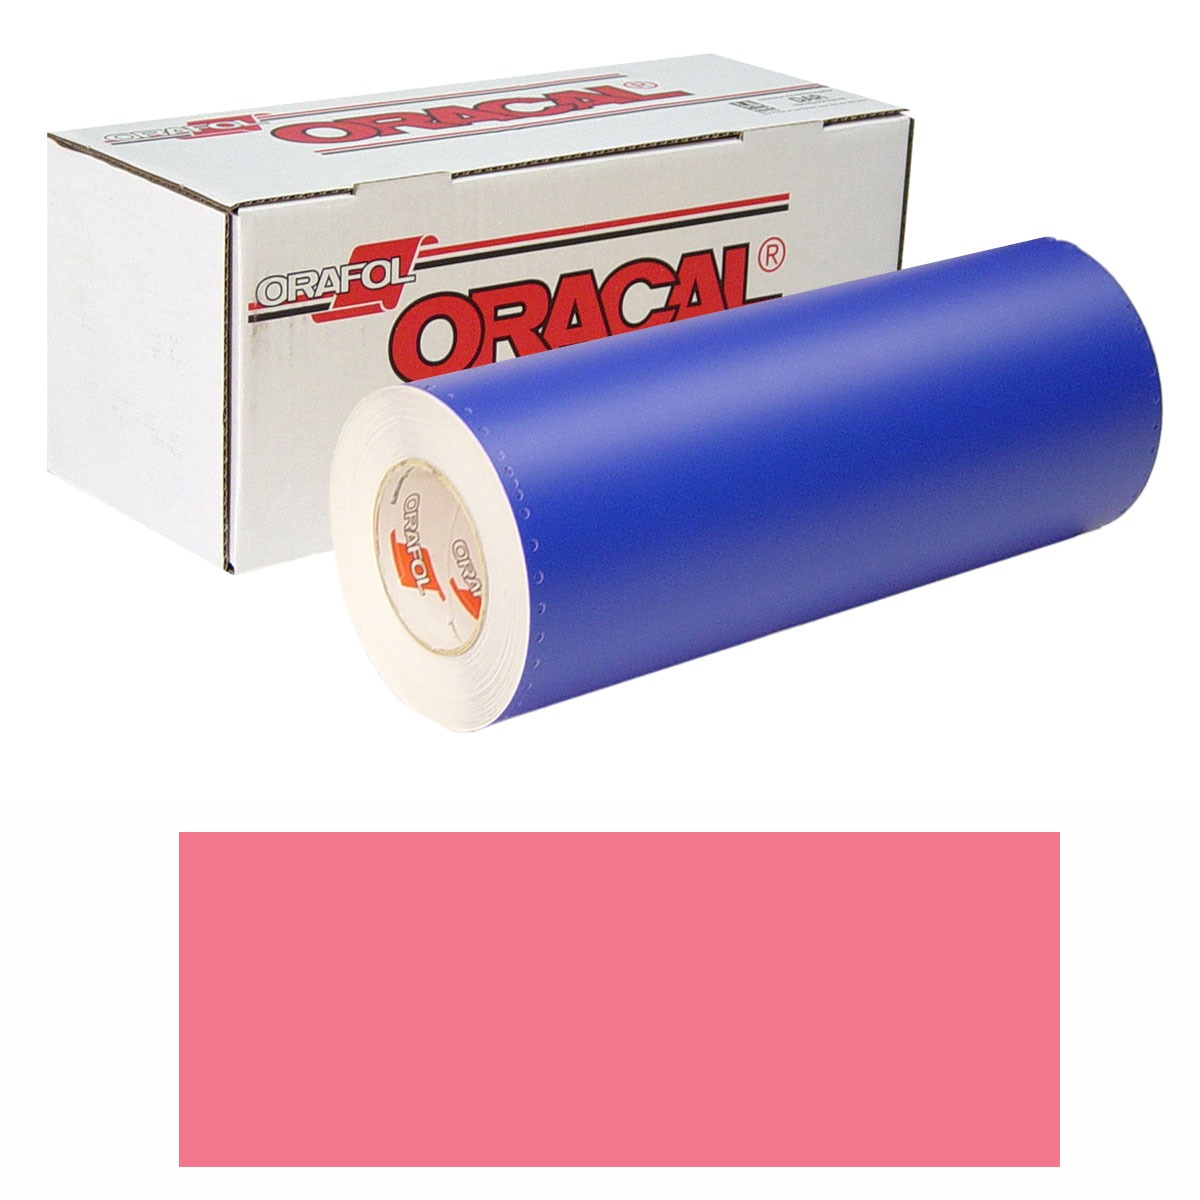 ORACAL 8300 30in X 50yd 032 Light Red